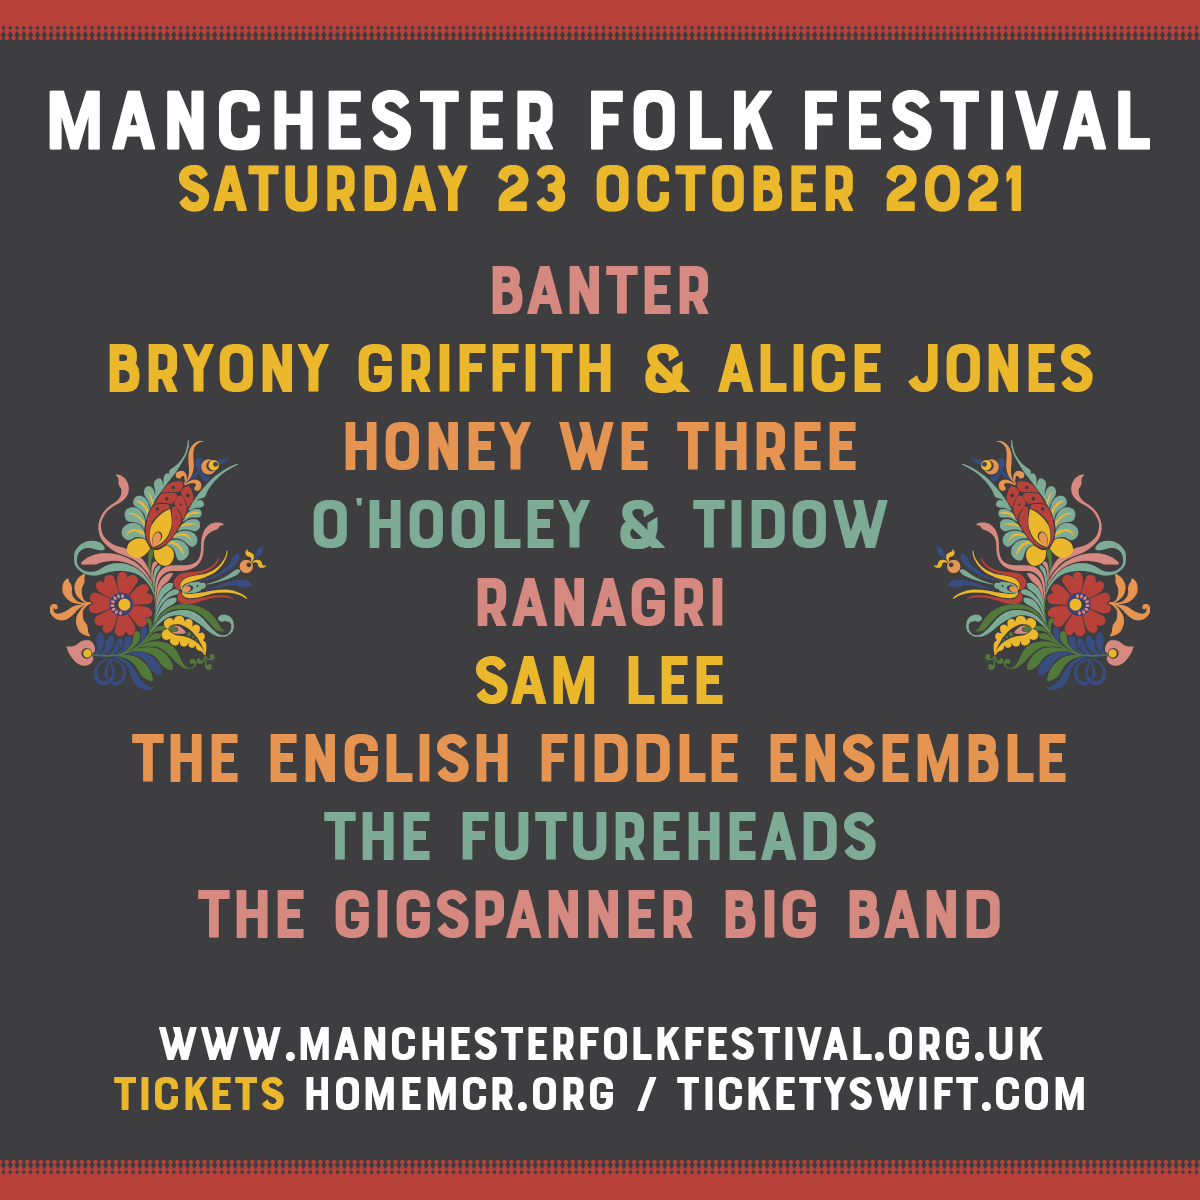 📢Manchester Folk Festival 2021 is ON SALE NOW!

Taking place 21st – 23rd Oct we have a great line-up including gigs from @thebreathmusic @LadyNade @kabantumusic @thefutureheads @sheelanagig @samleesong @kathryntickell & many more! 😃

Full line up here: manchesterfolkfestival.org.uk/whats-on/